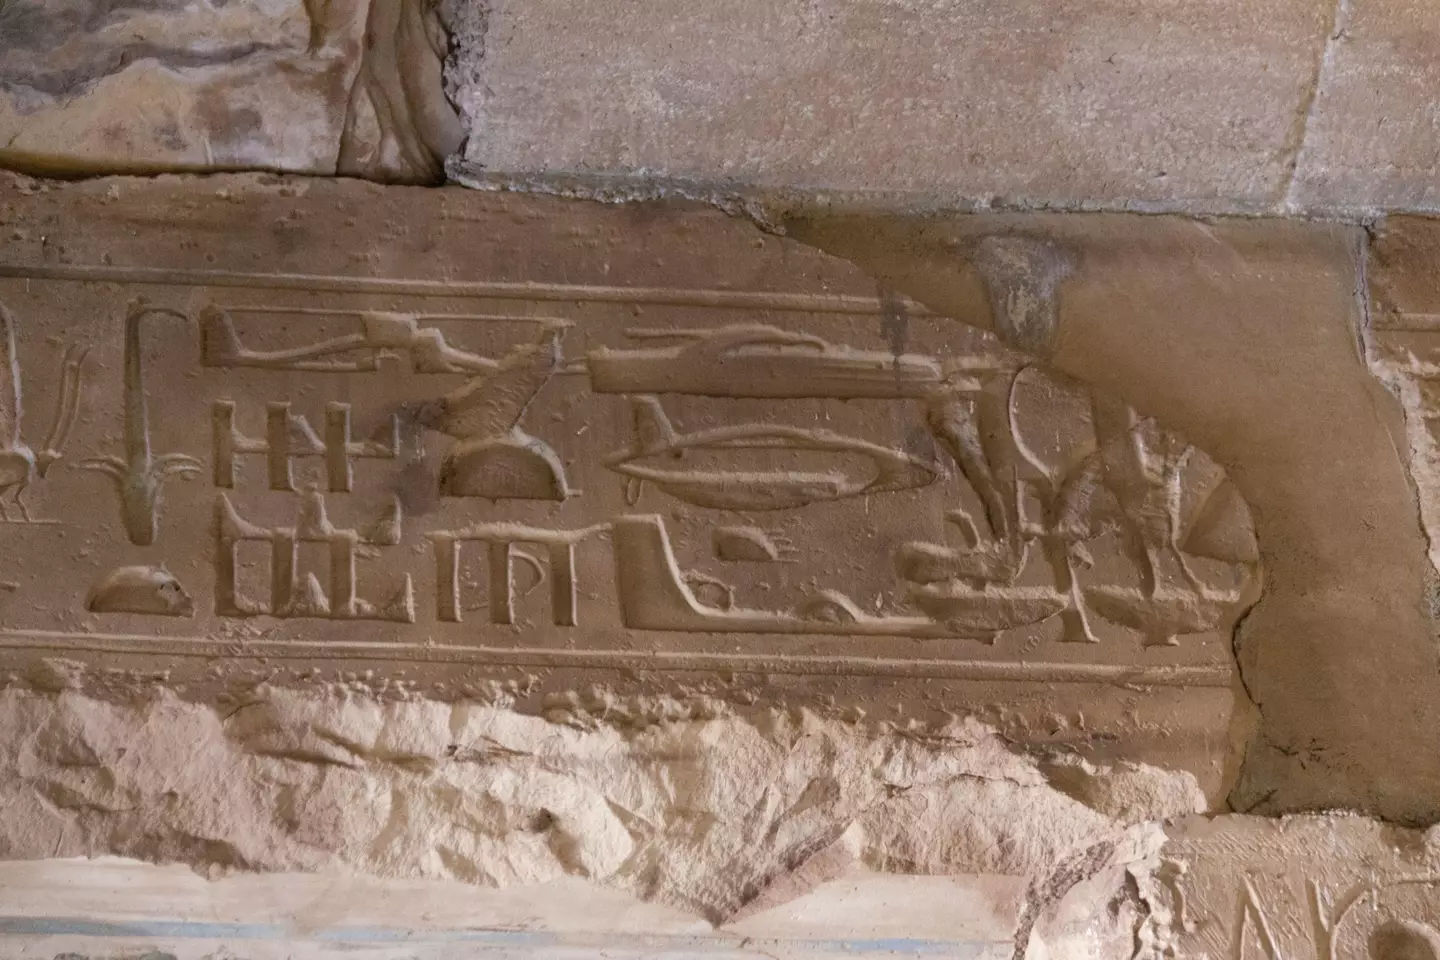 The author continued by claiming that the hieroglyph is part of an unfinished temple.